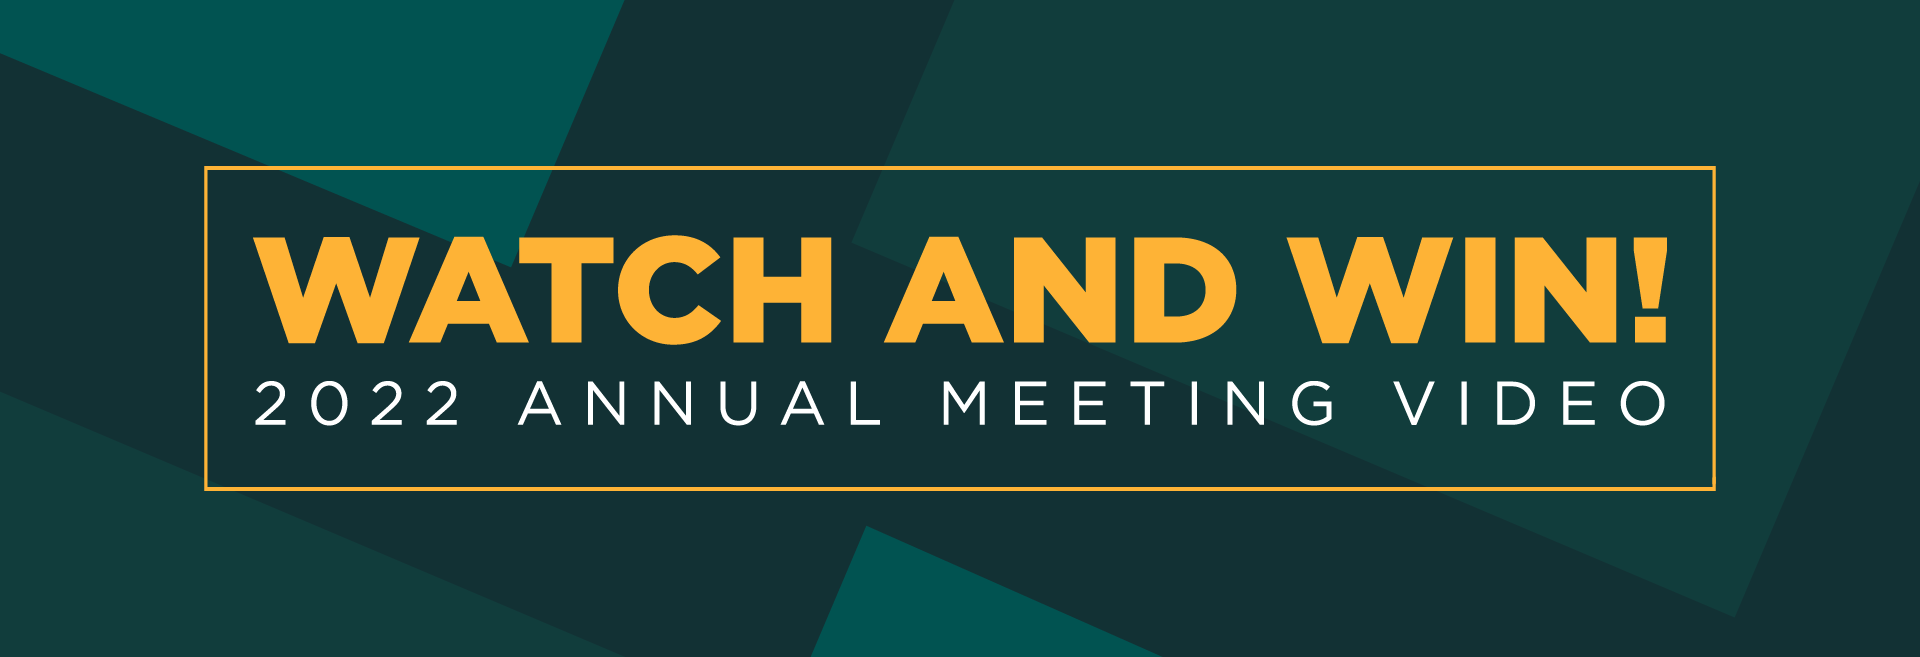 Watch and Win! 2022 Annual Meeting Video